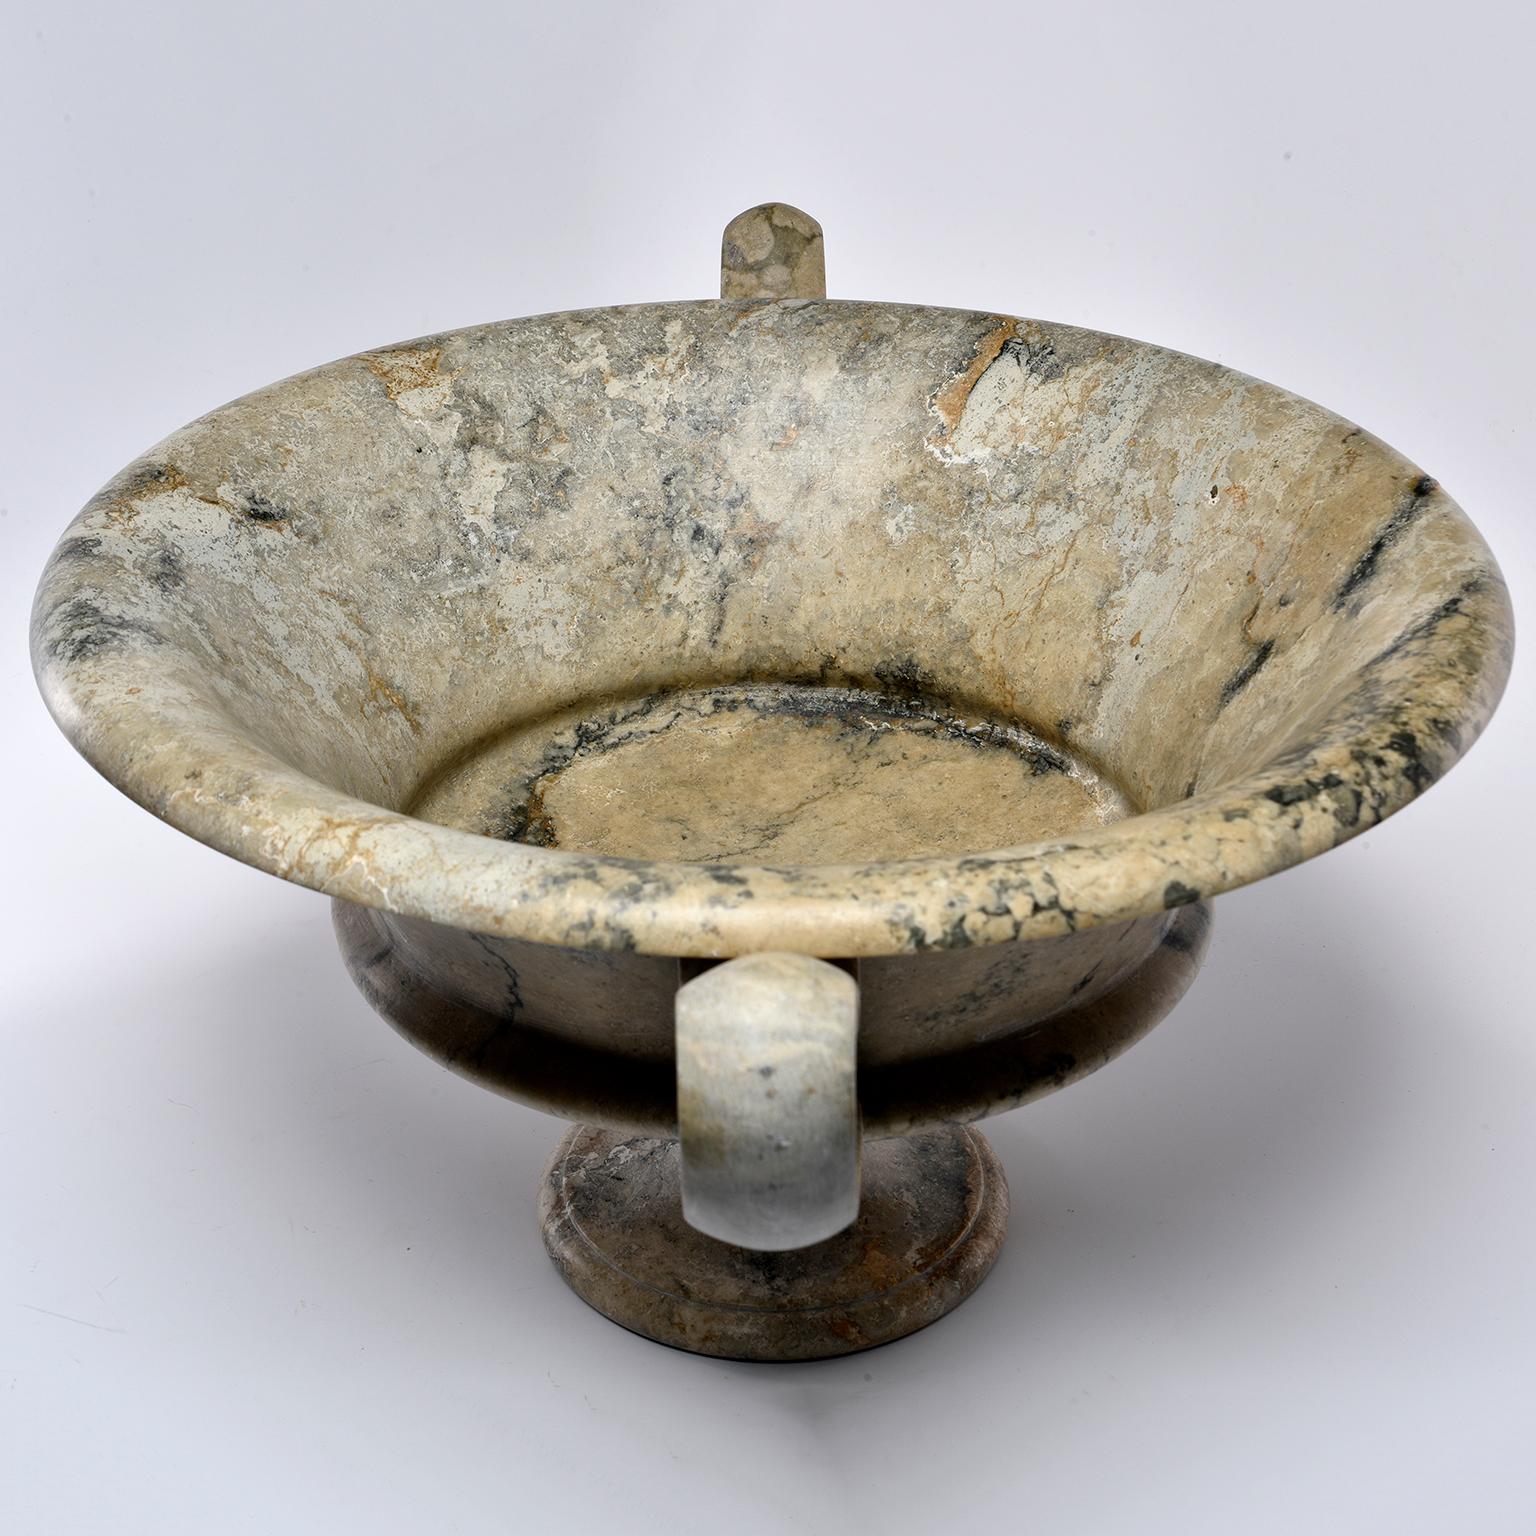 New, large hand carved Italian marble vessel has a pedestal base, wide handles and richly toned taupe marble with gray-green and cream colored streaks. New, custom made with no flaws found.